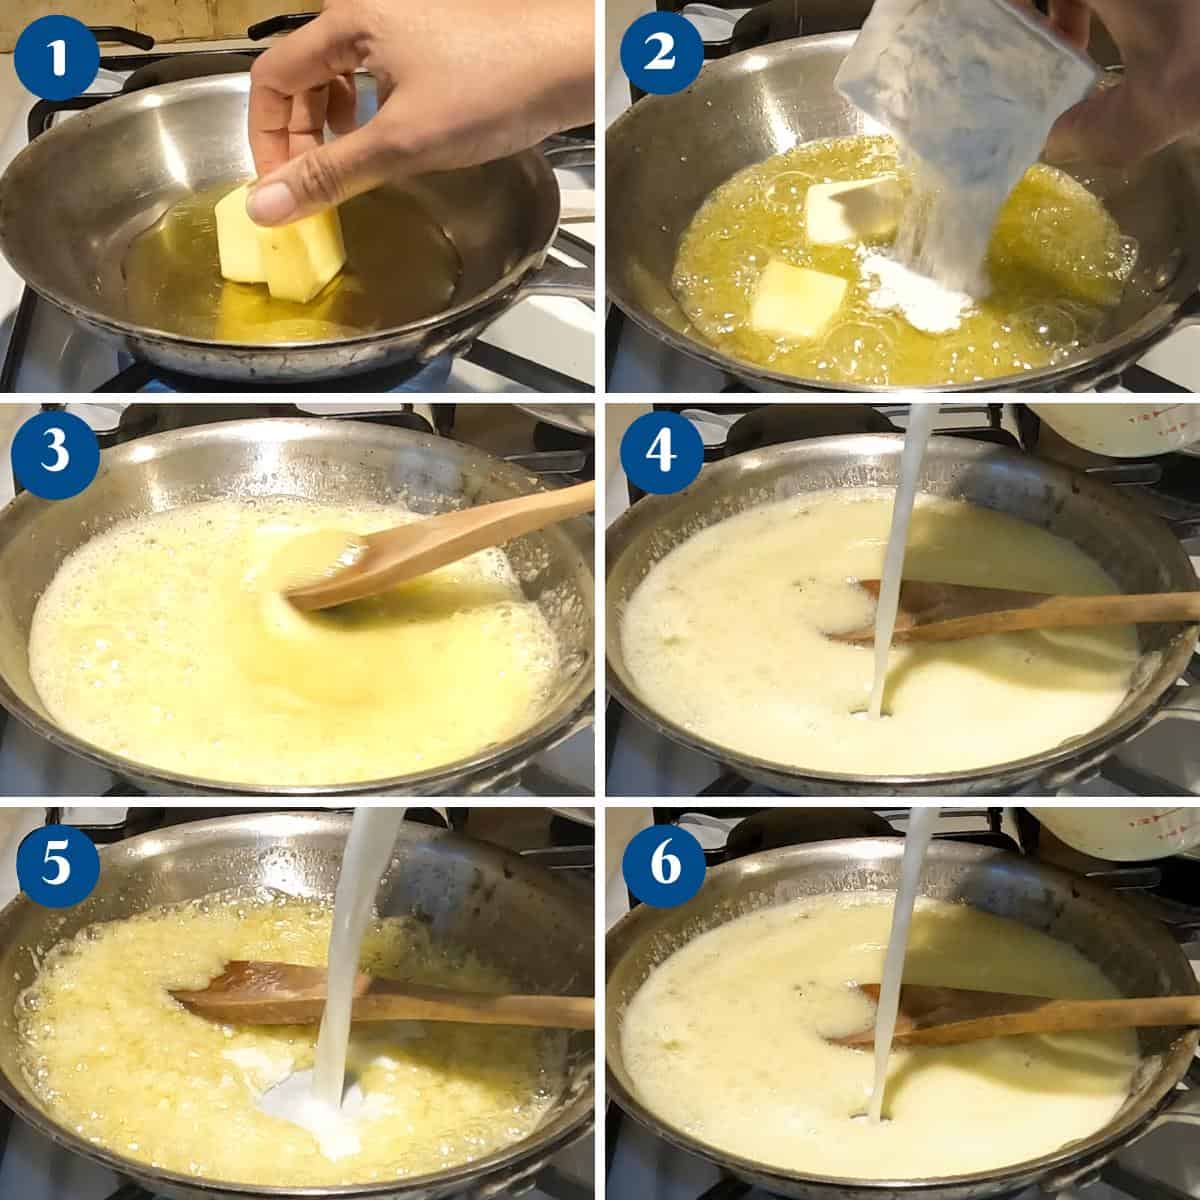 Progress pictures making cheese sauce.